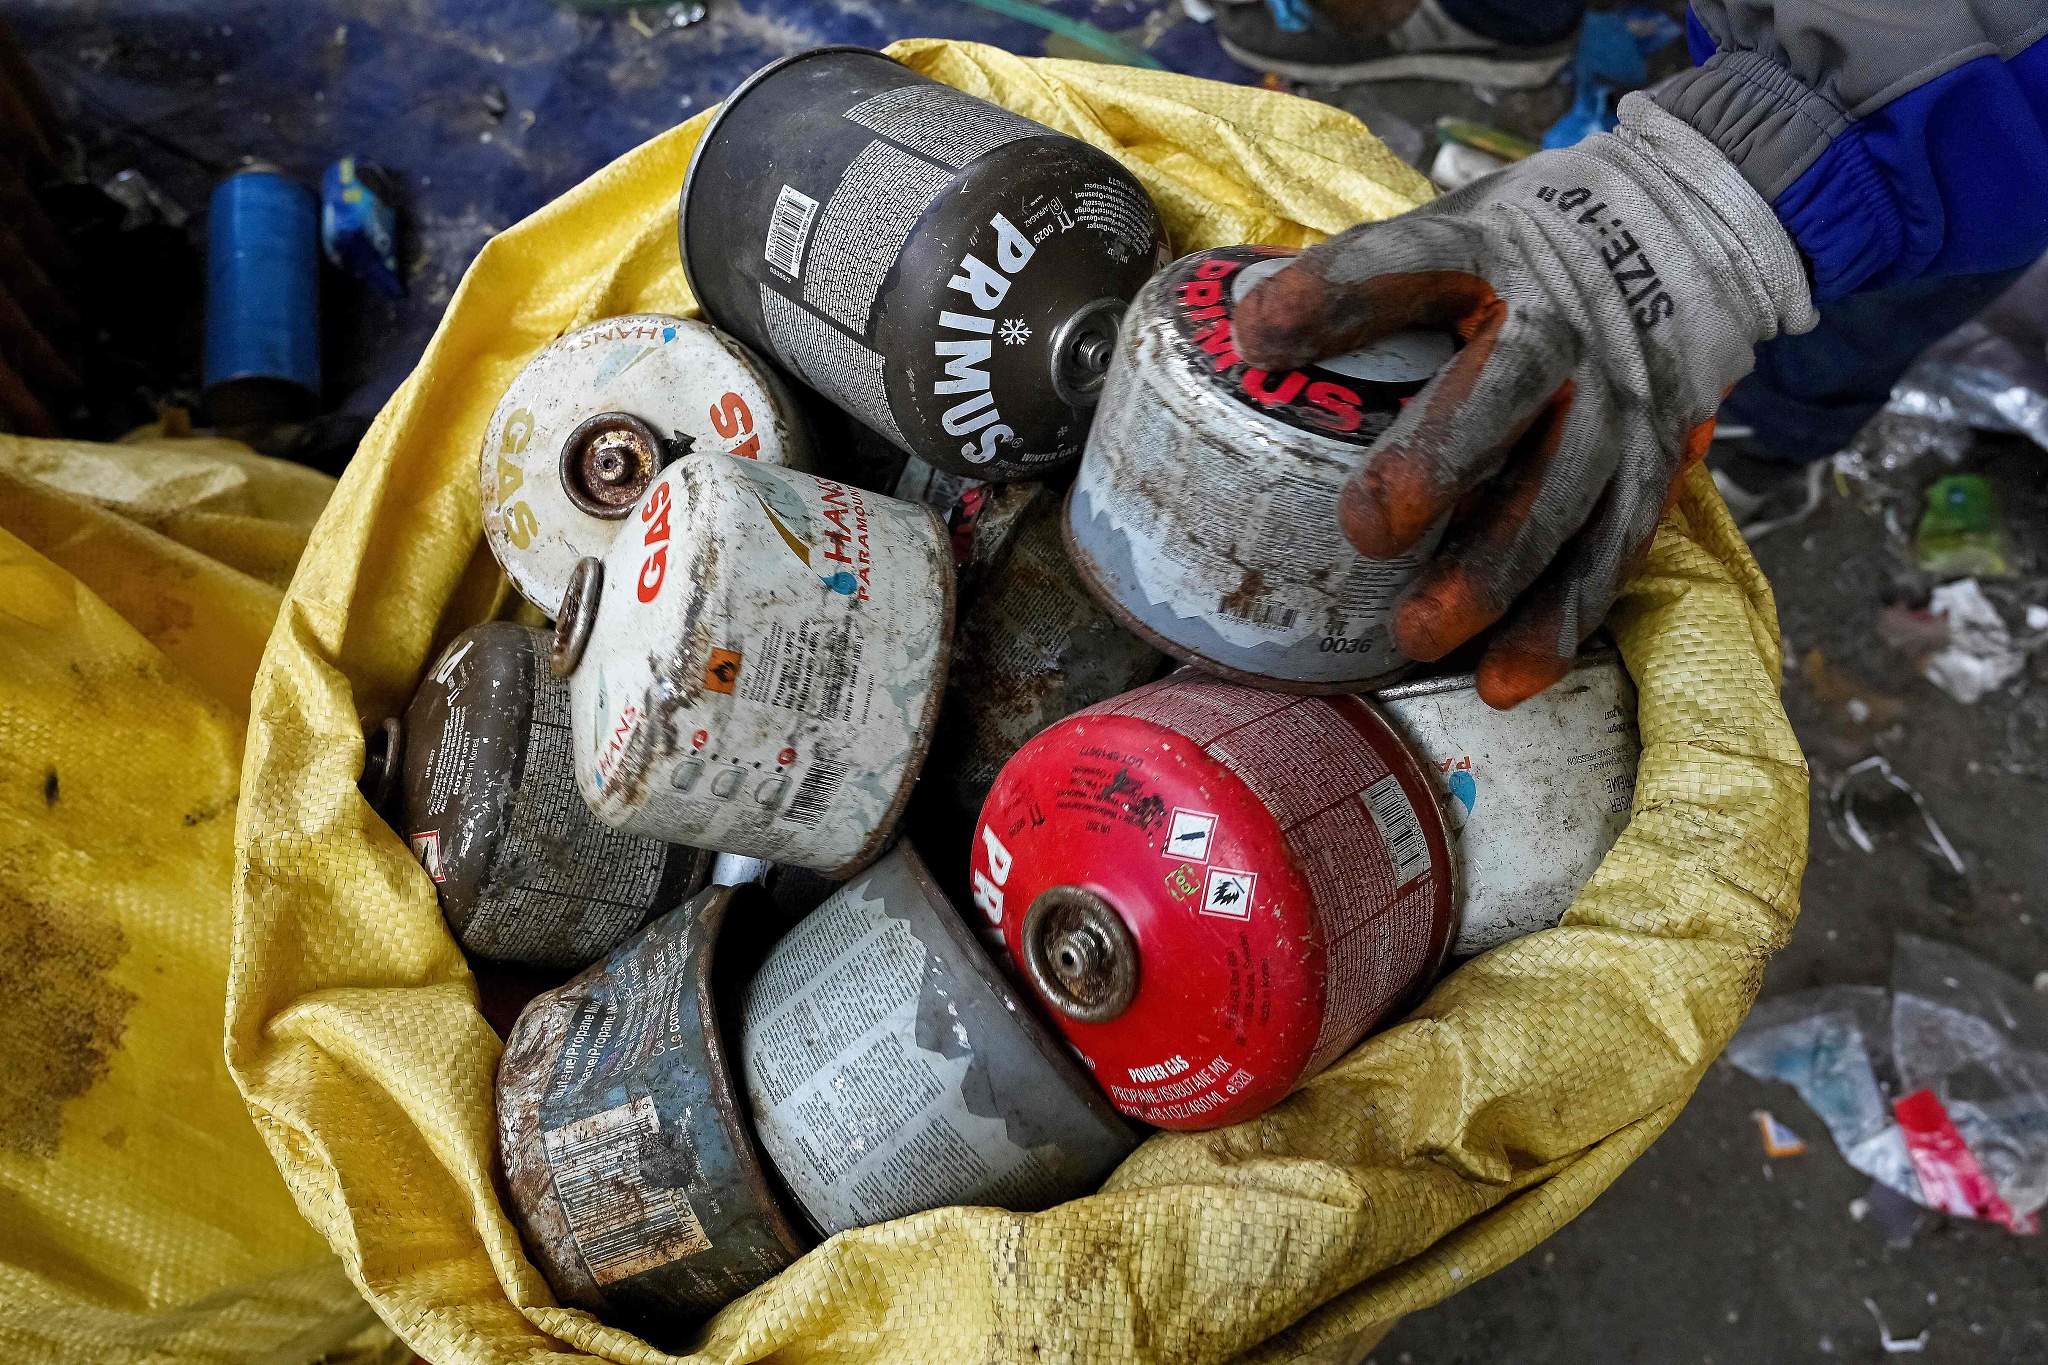 A worker collects used power gas cartridges in a sack with other waste materials retrieved from Mount Qomolangma to recycle in Kathmandu, Nepal, June 12, 2024. /CFP